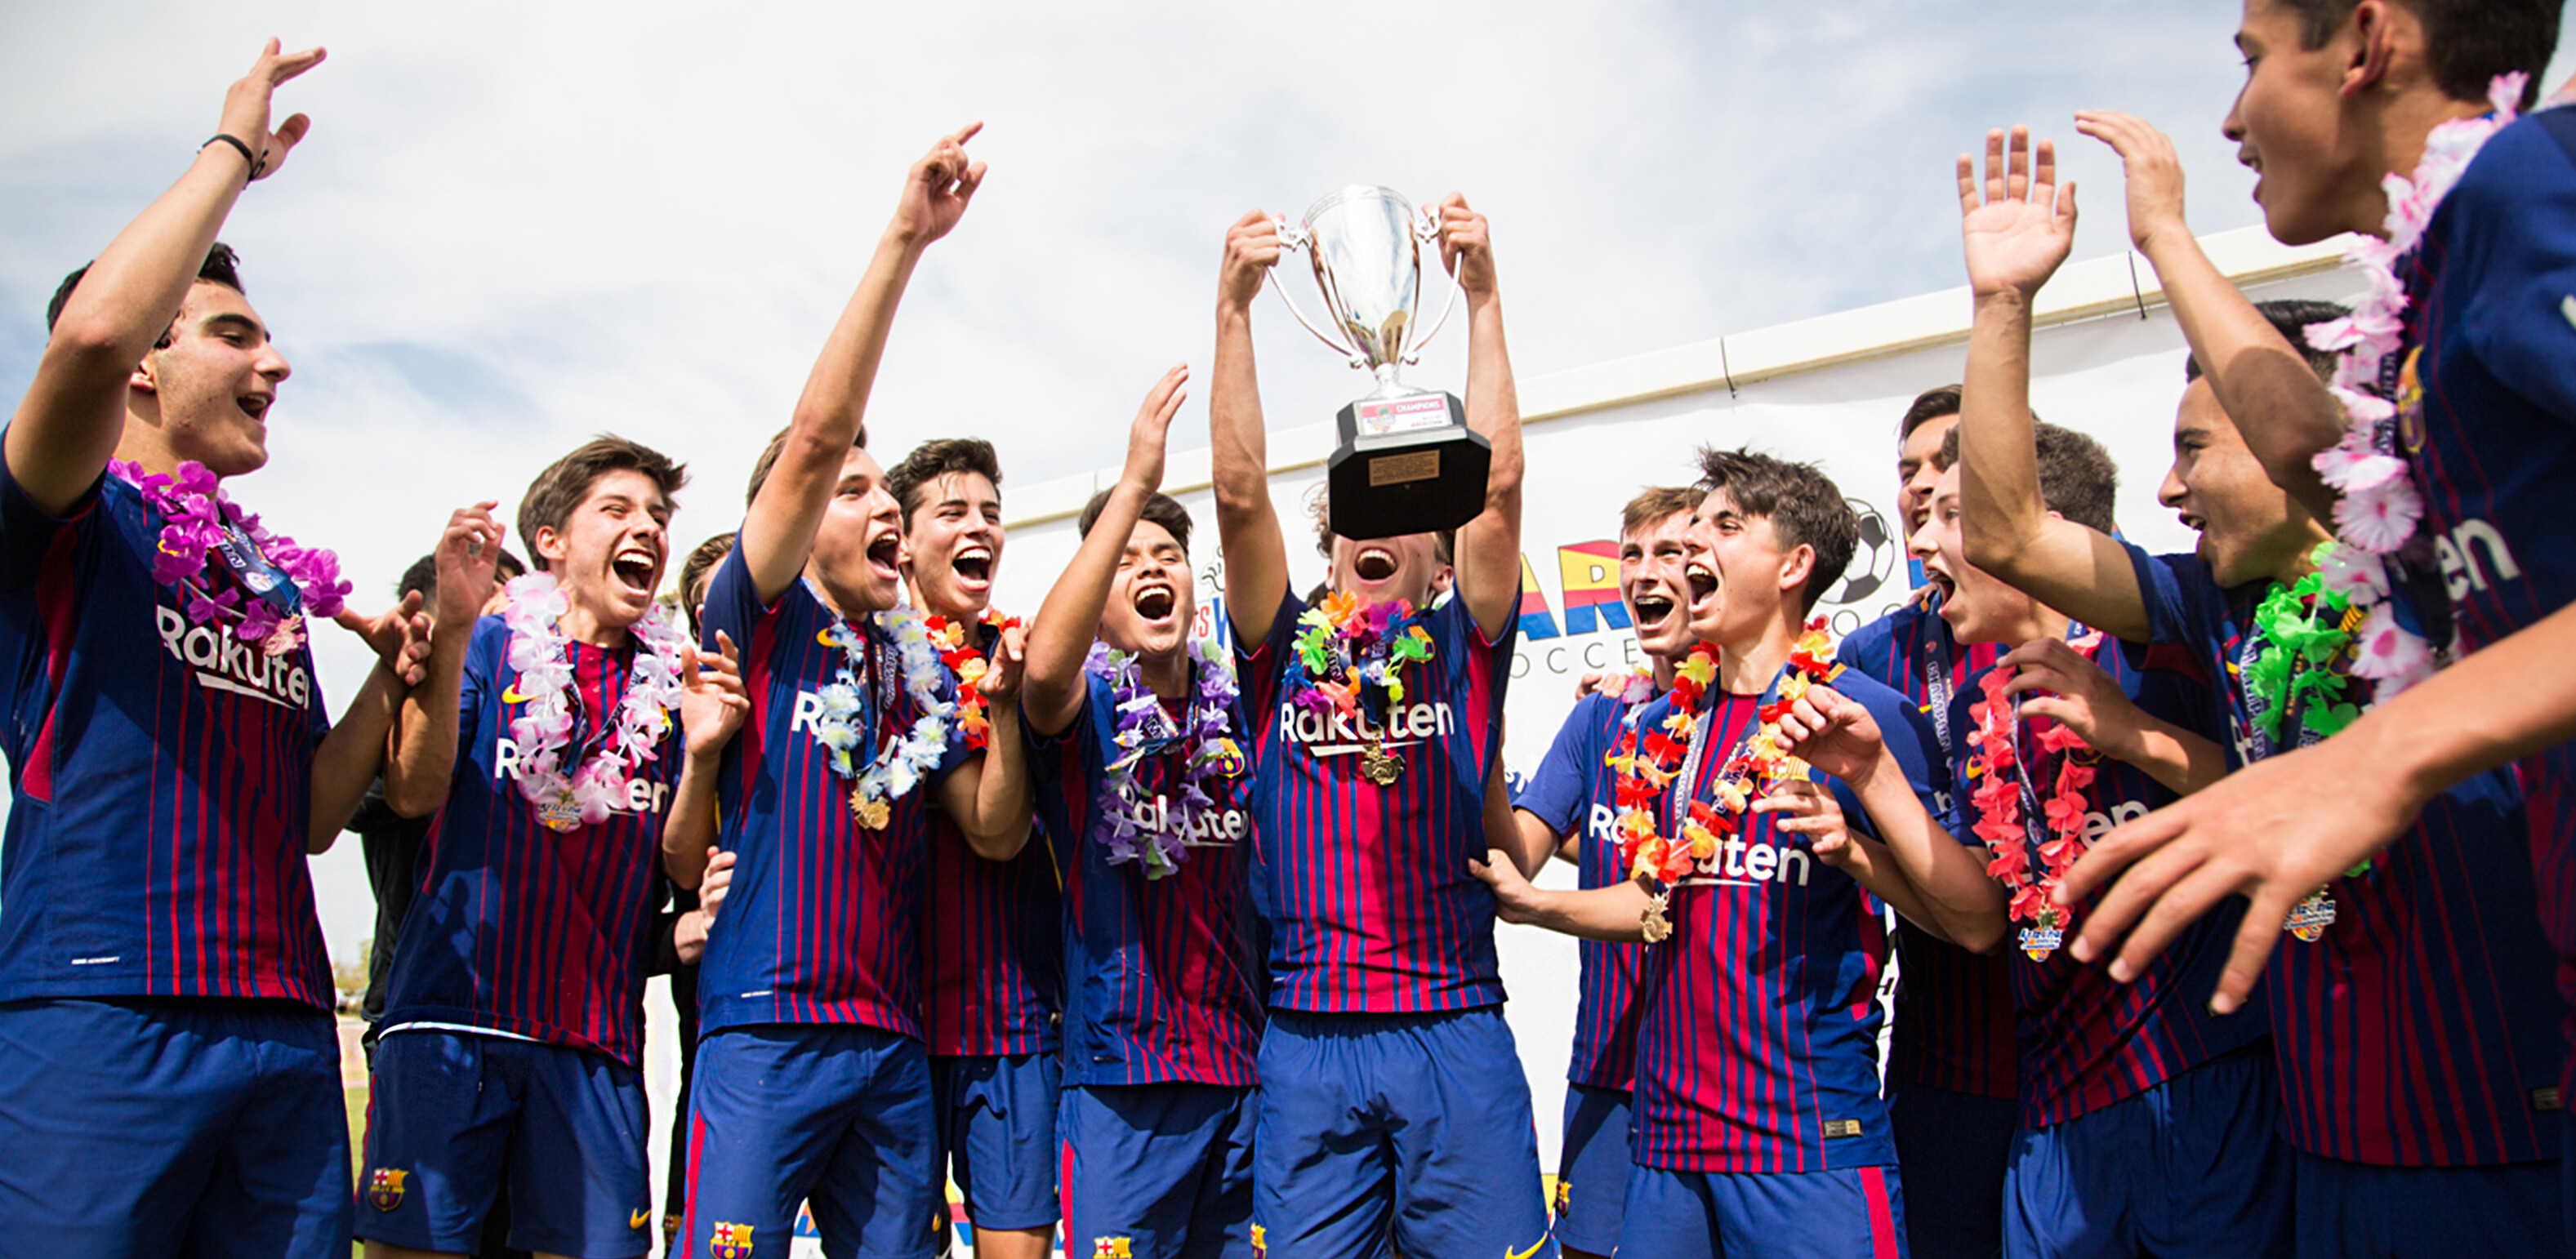 Barca Academy hoisting 2018 Arizona State Cup Championship trophy after beating Tuzos Academy in OT PK shootout Thriller